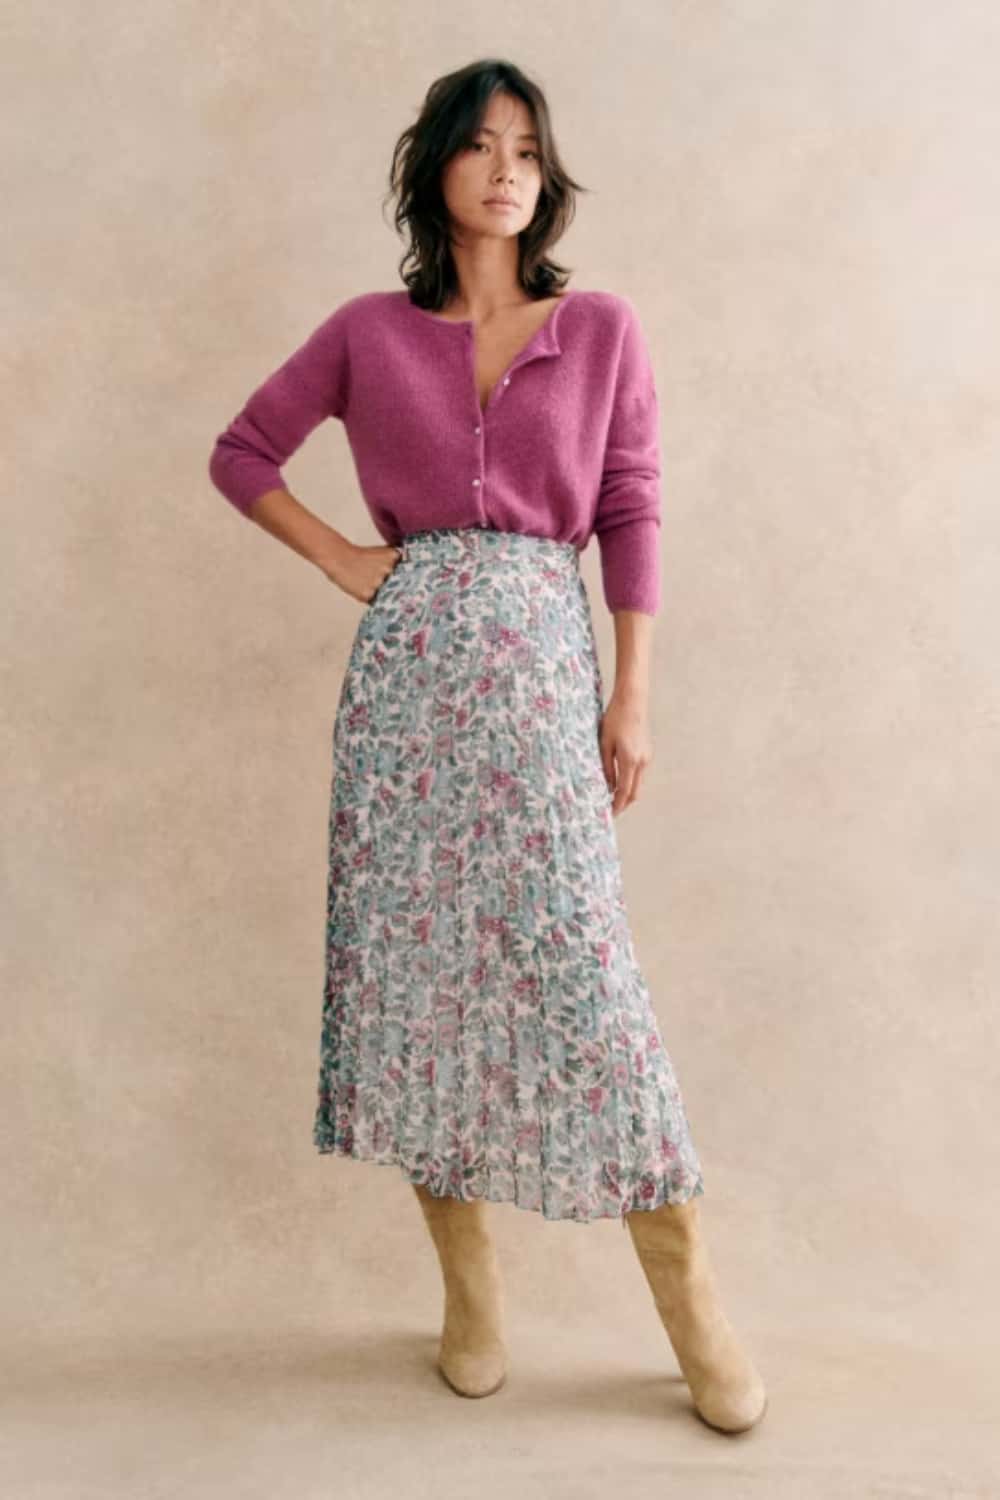 Casual Thanksgiving Outfit Idea - Printed Skirt With Cardigan